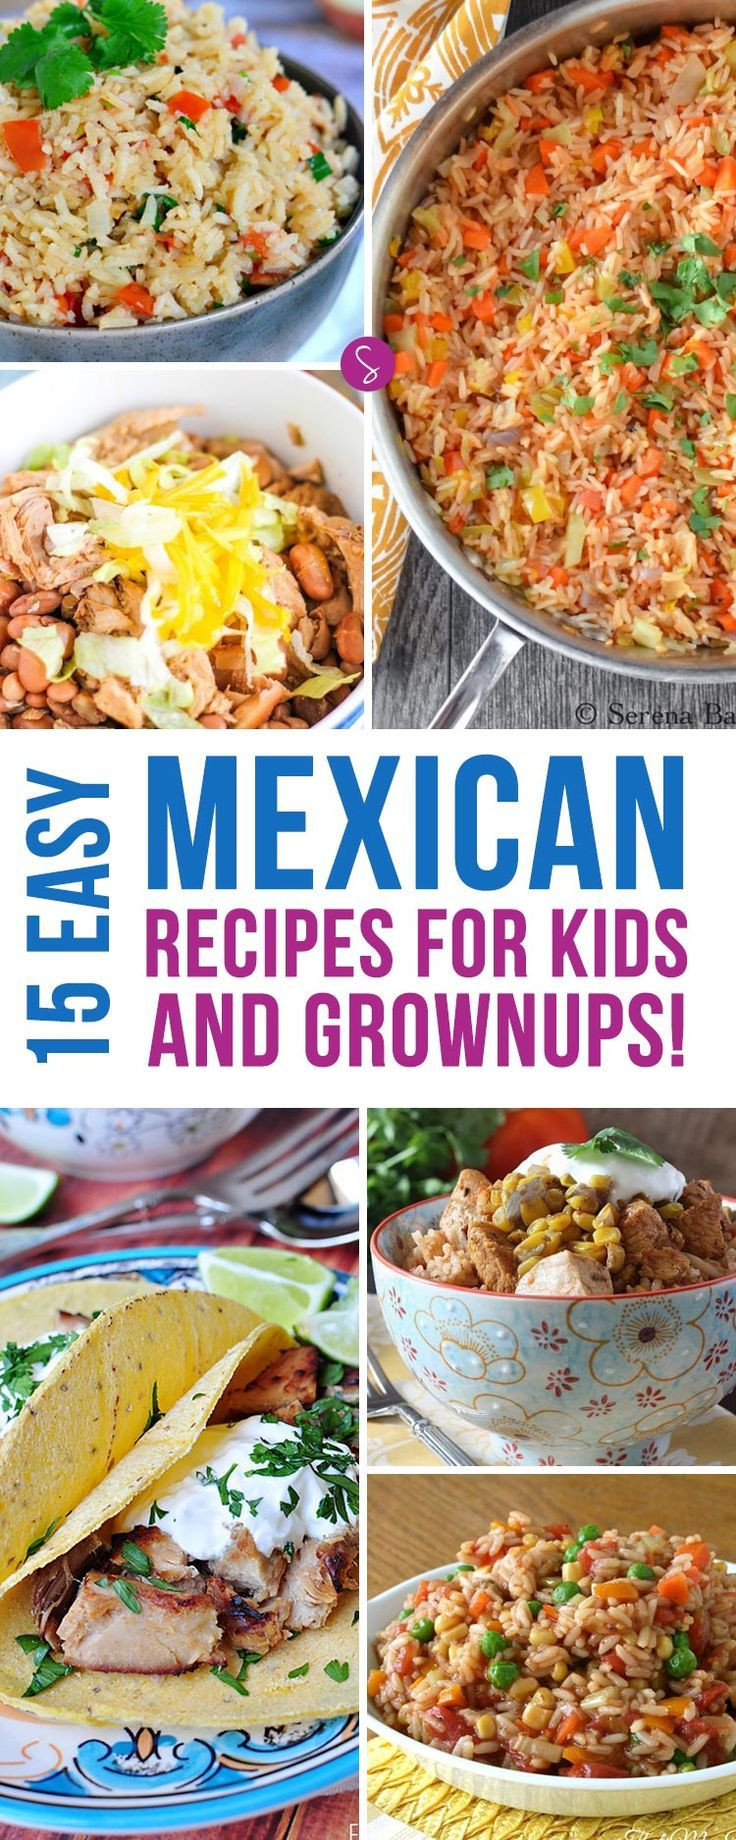 Mexican Food Ideas For Dinner
 15 Easy Mexican Dinner Ideas Even the Kids Will Enjoy